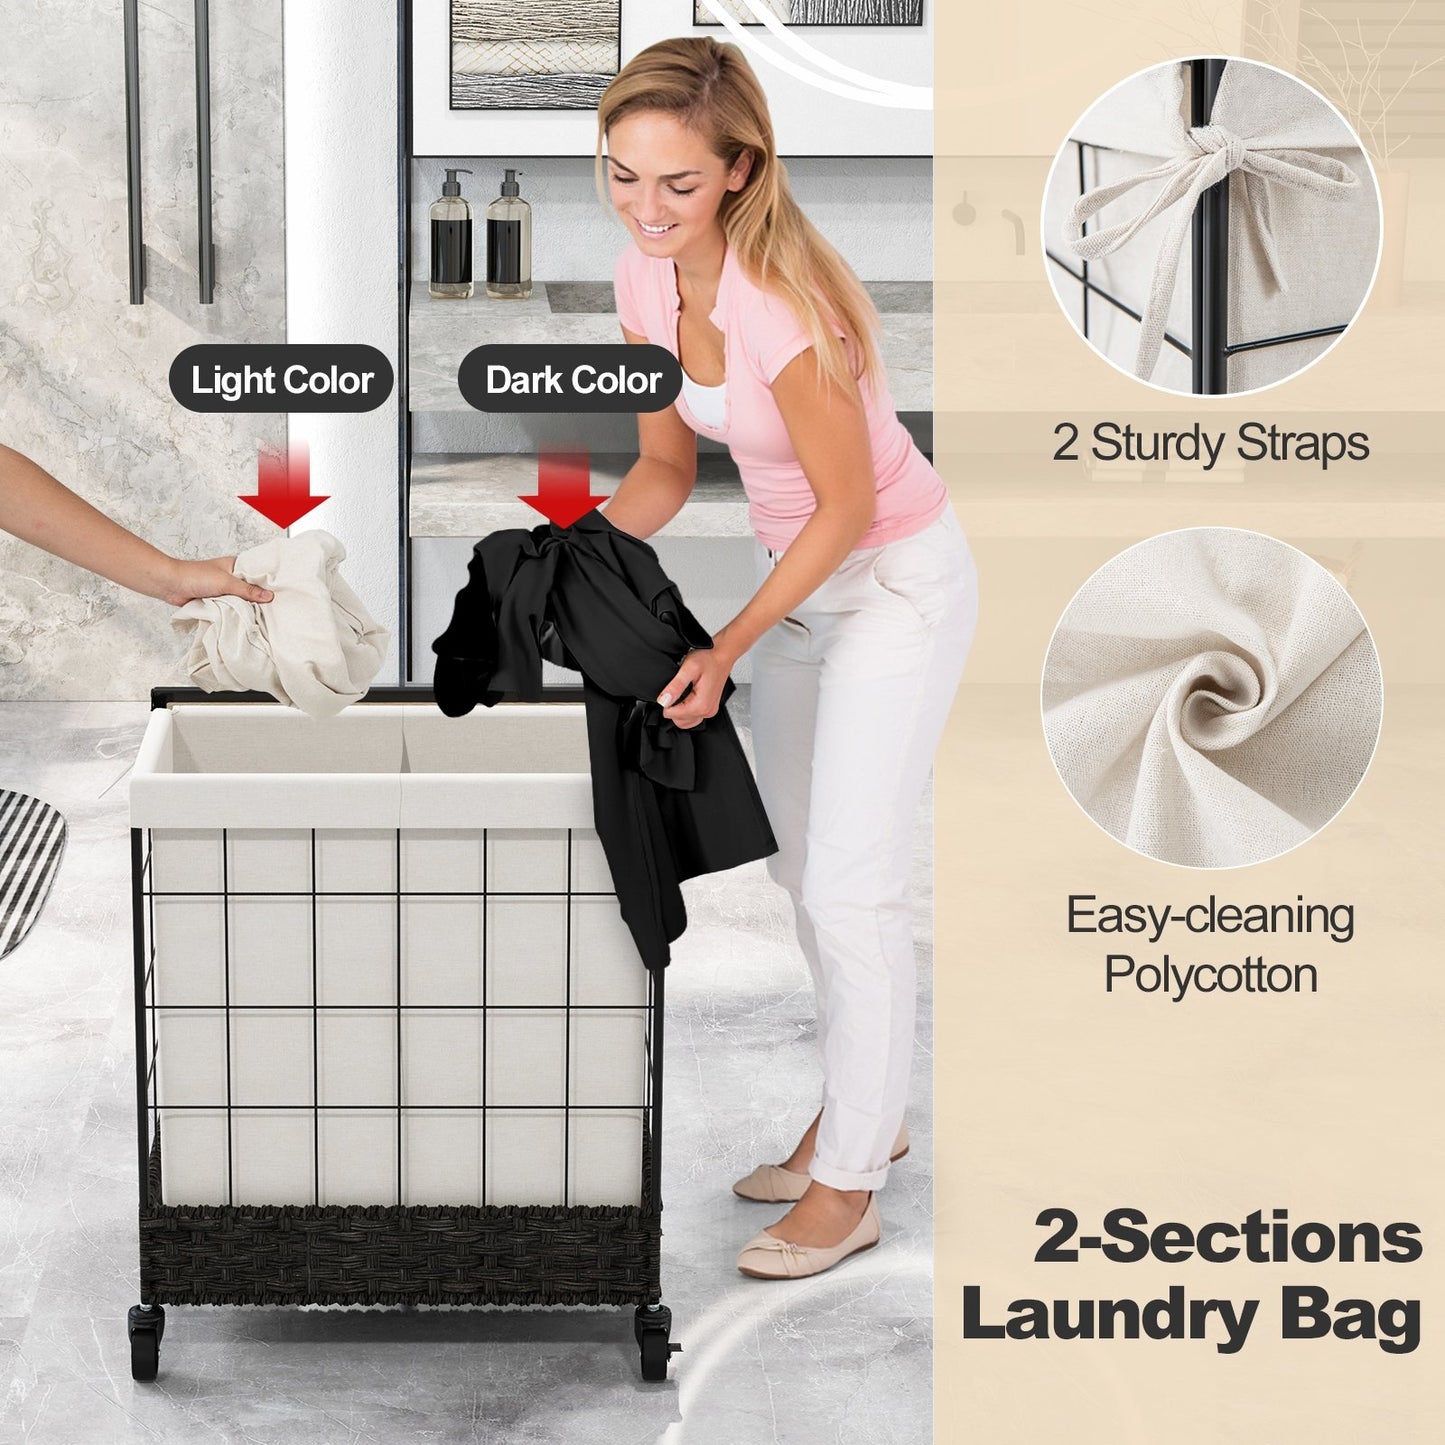 Laundry Hamper with Lid and Lockable Wheels